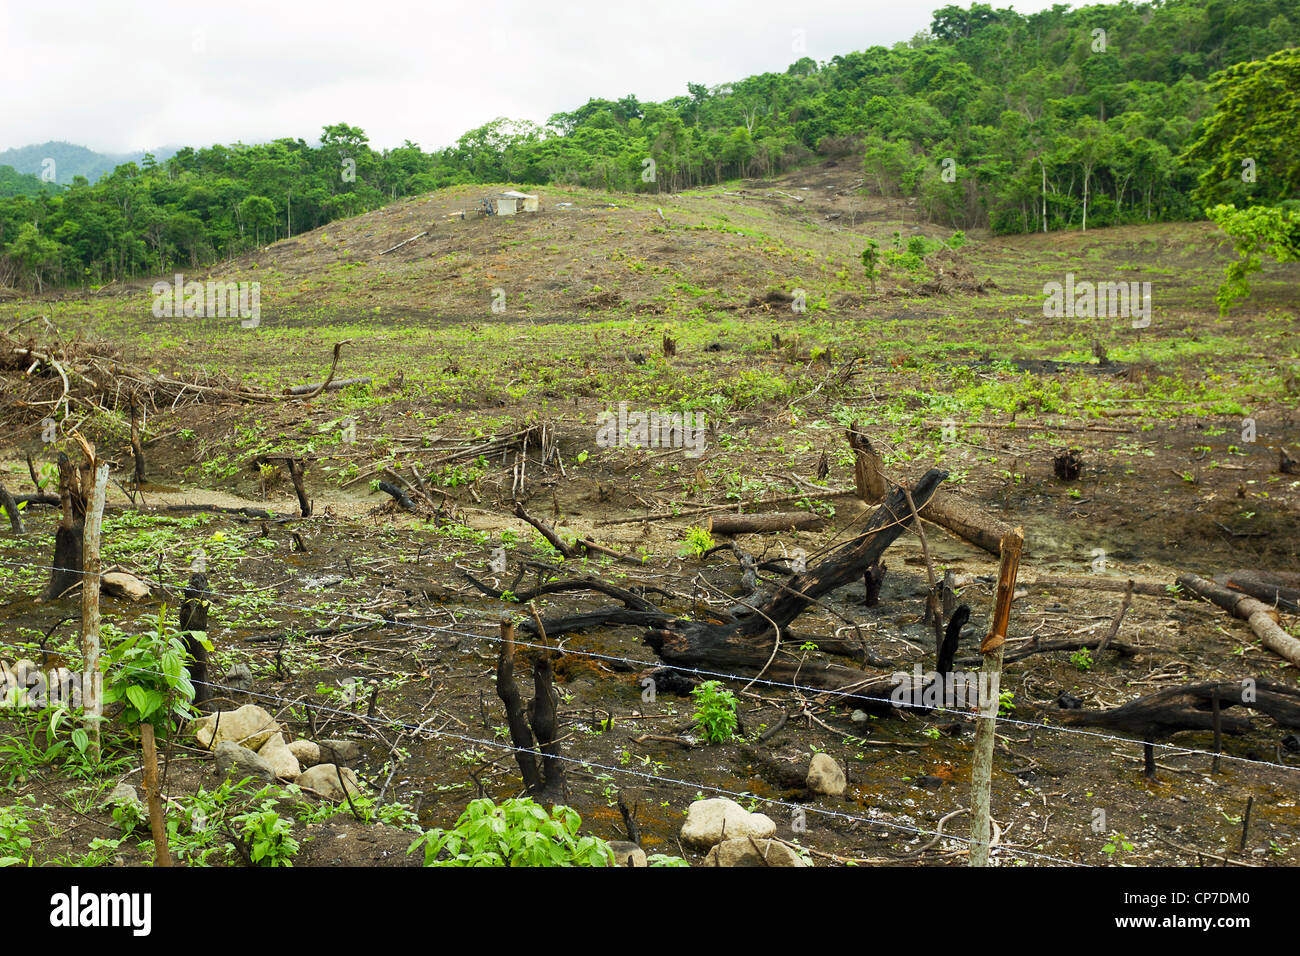 Slash and burn cultivation in tropical rainforest on the Pacific coast of Ecuador Stock Photo